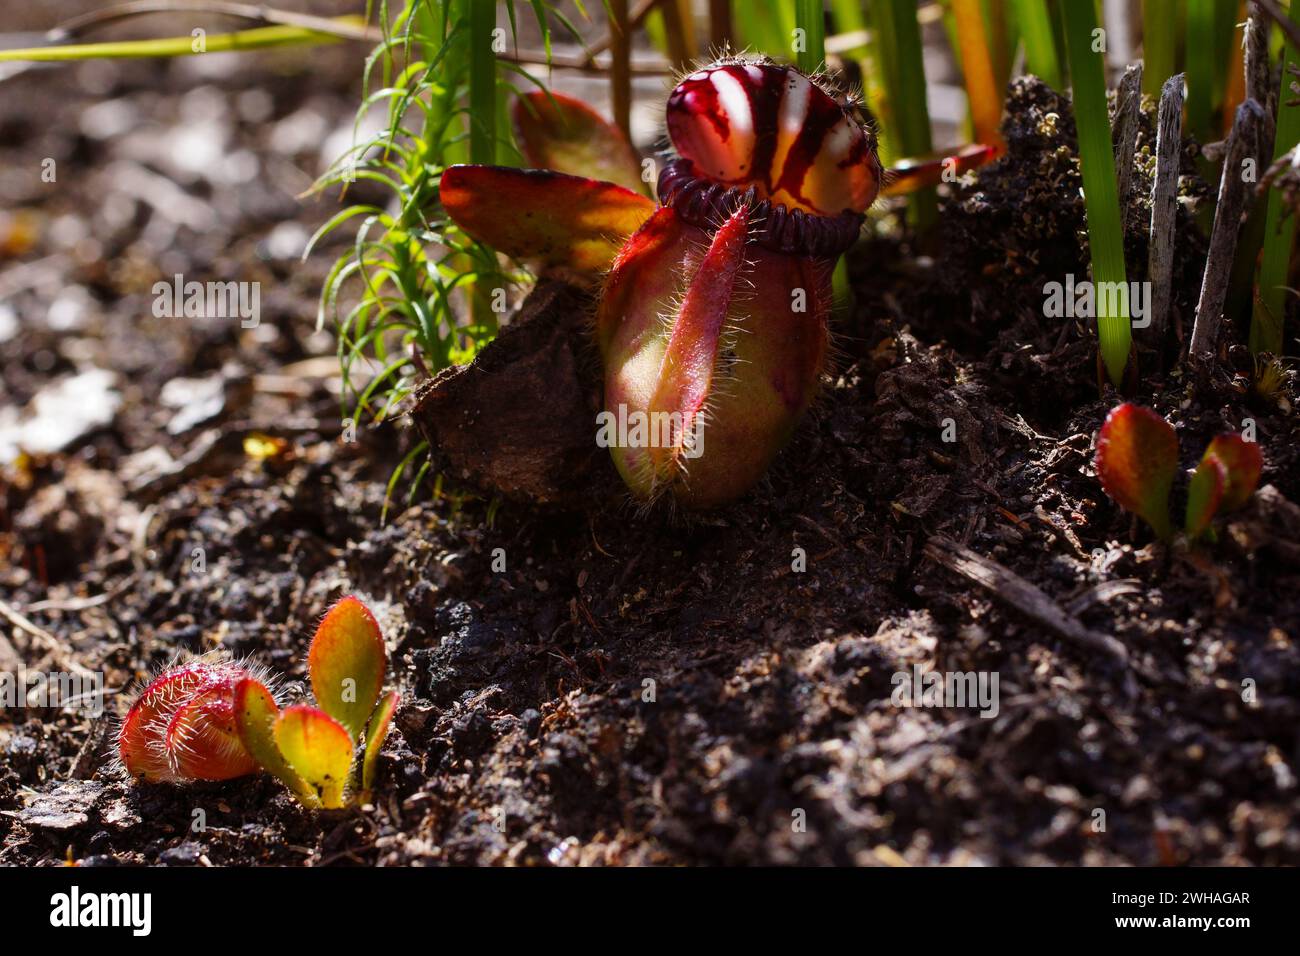 Albany pitcher plant (Cephalotus follicularis), adult plant and seedling, in natural habitat, Western Australia Stock Photo